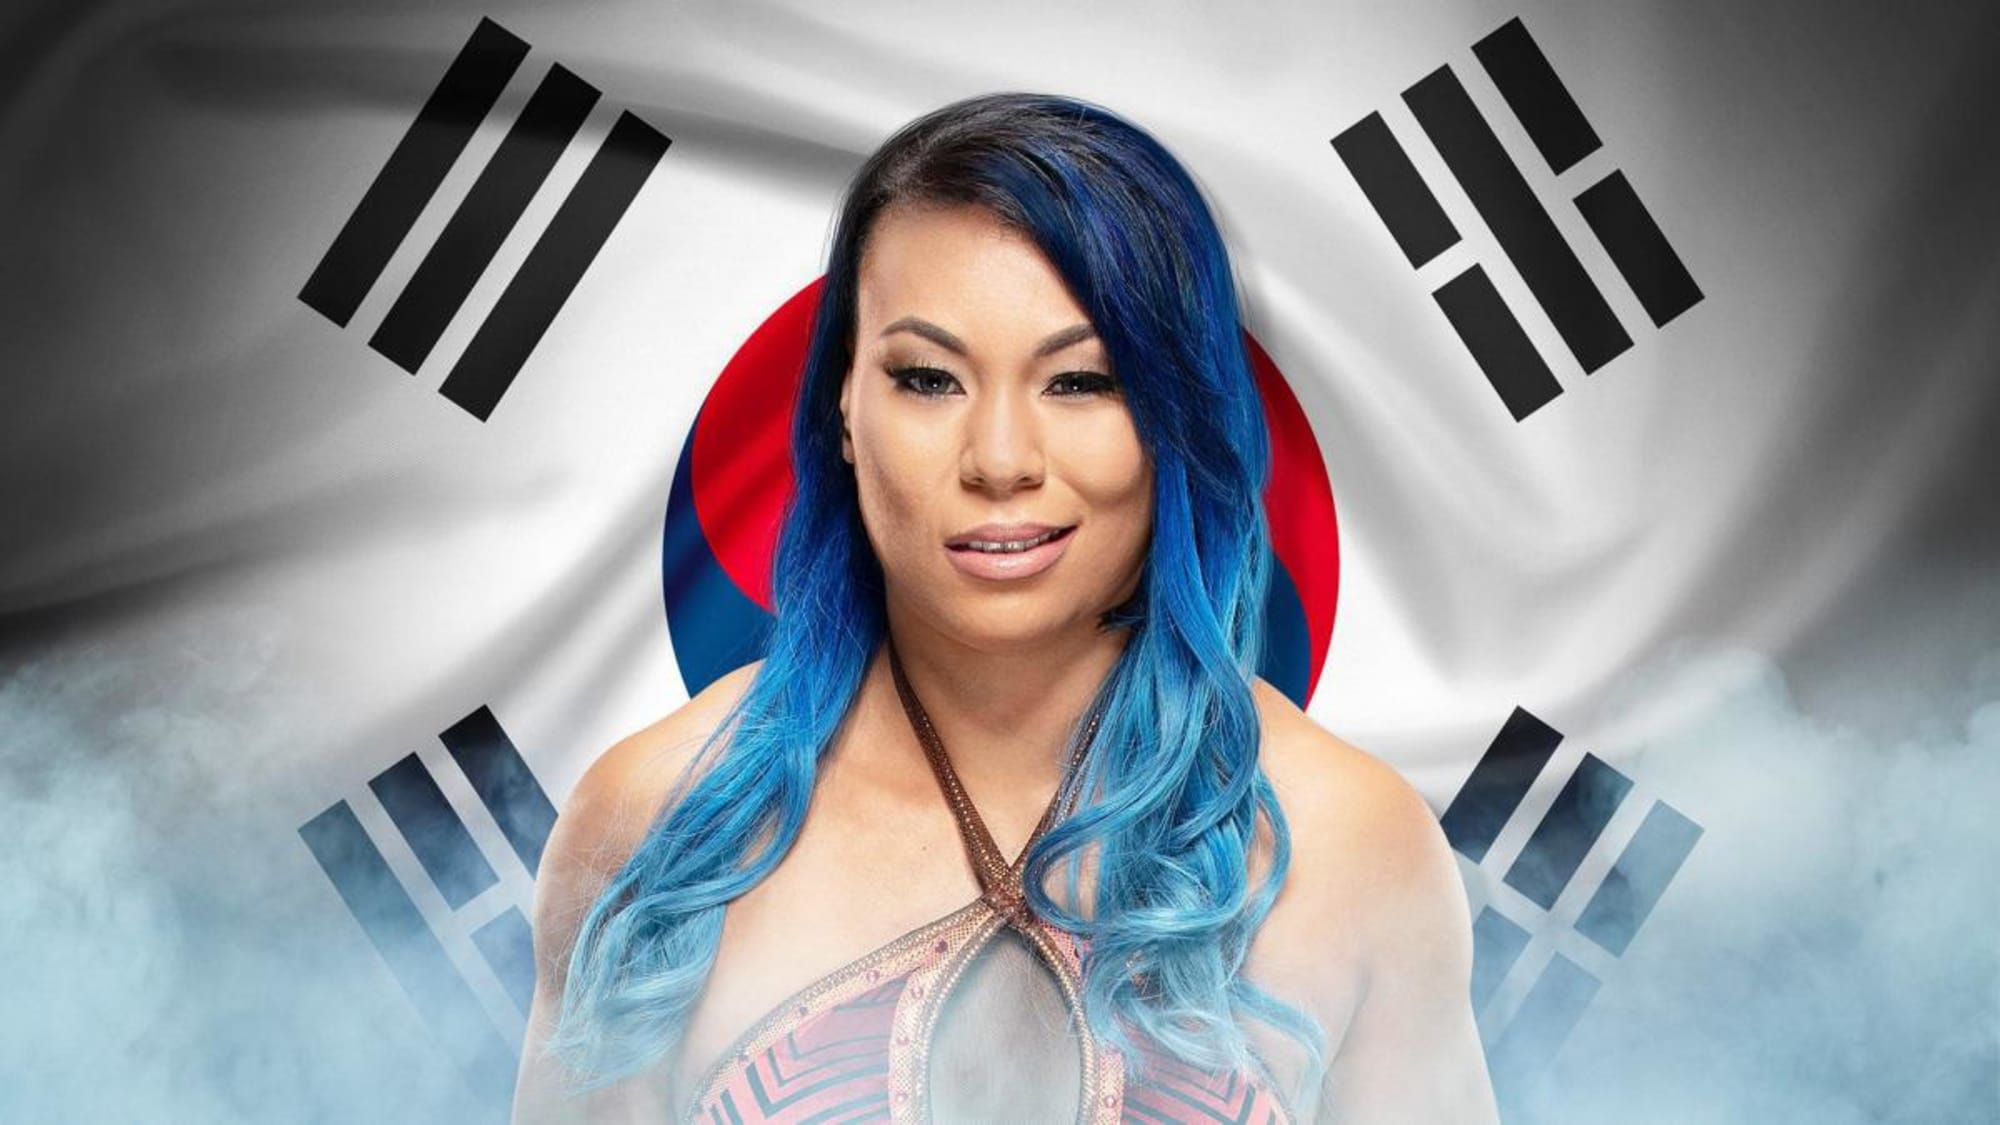 Gail Asian Porn Star - WWE NXT: Mia Yim and why realistic representation matters